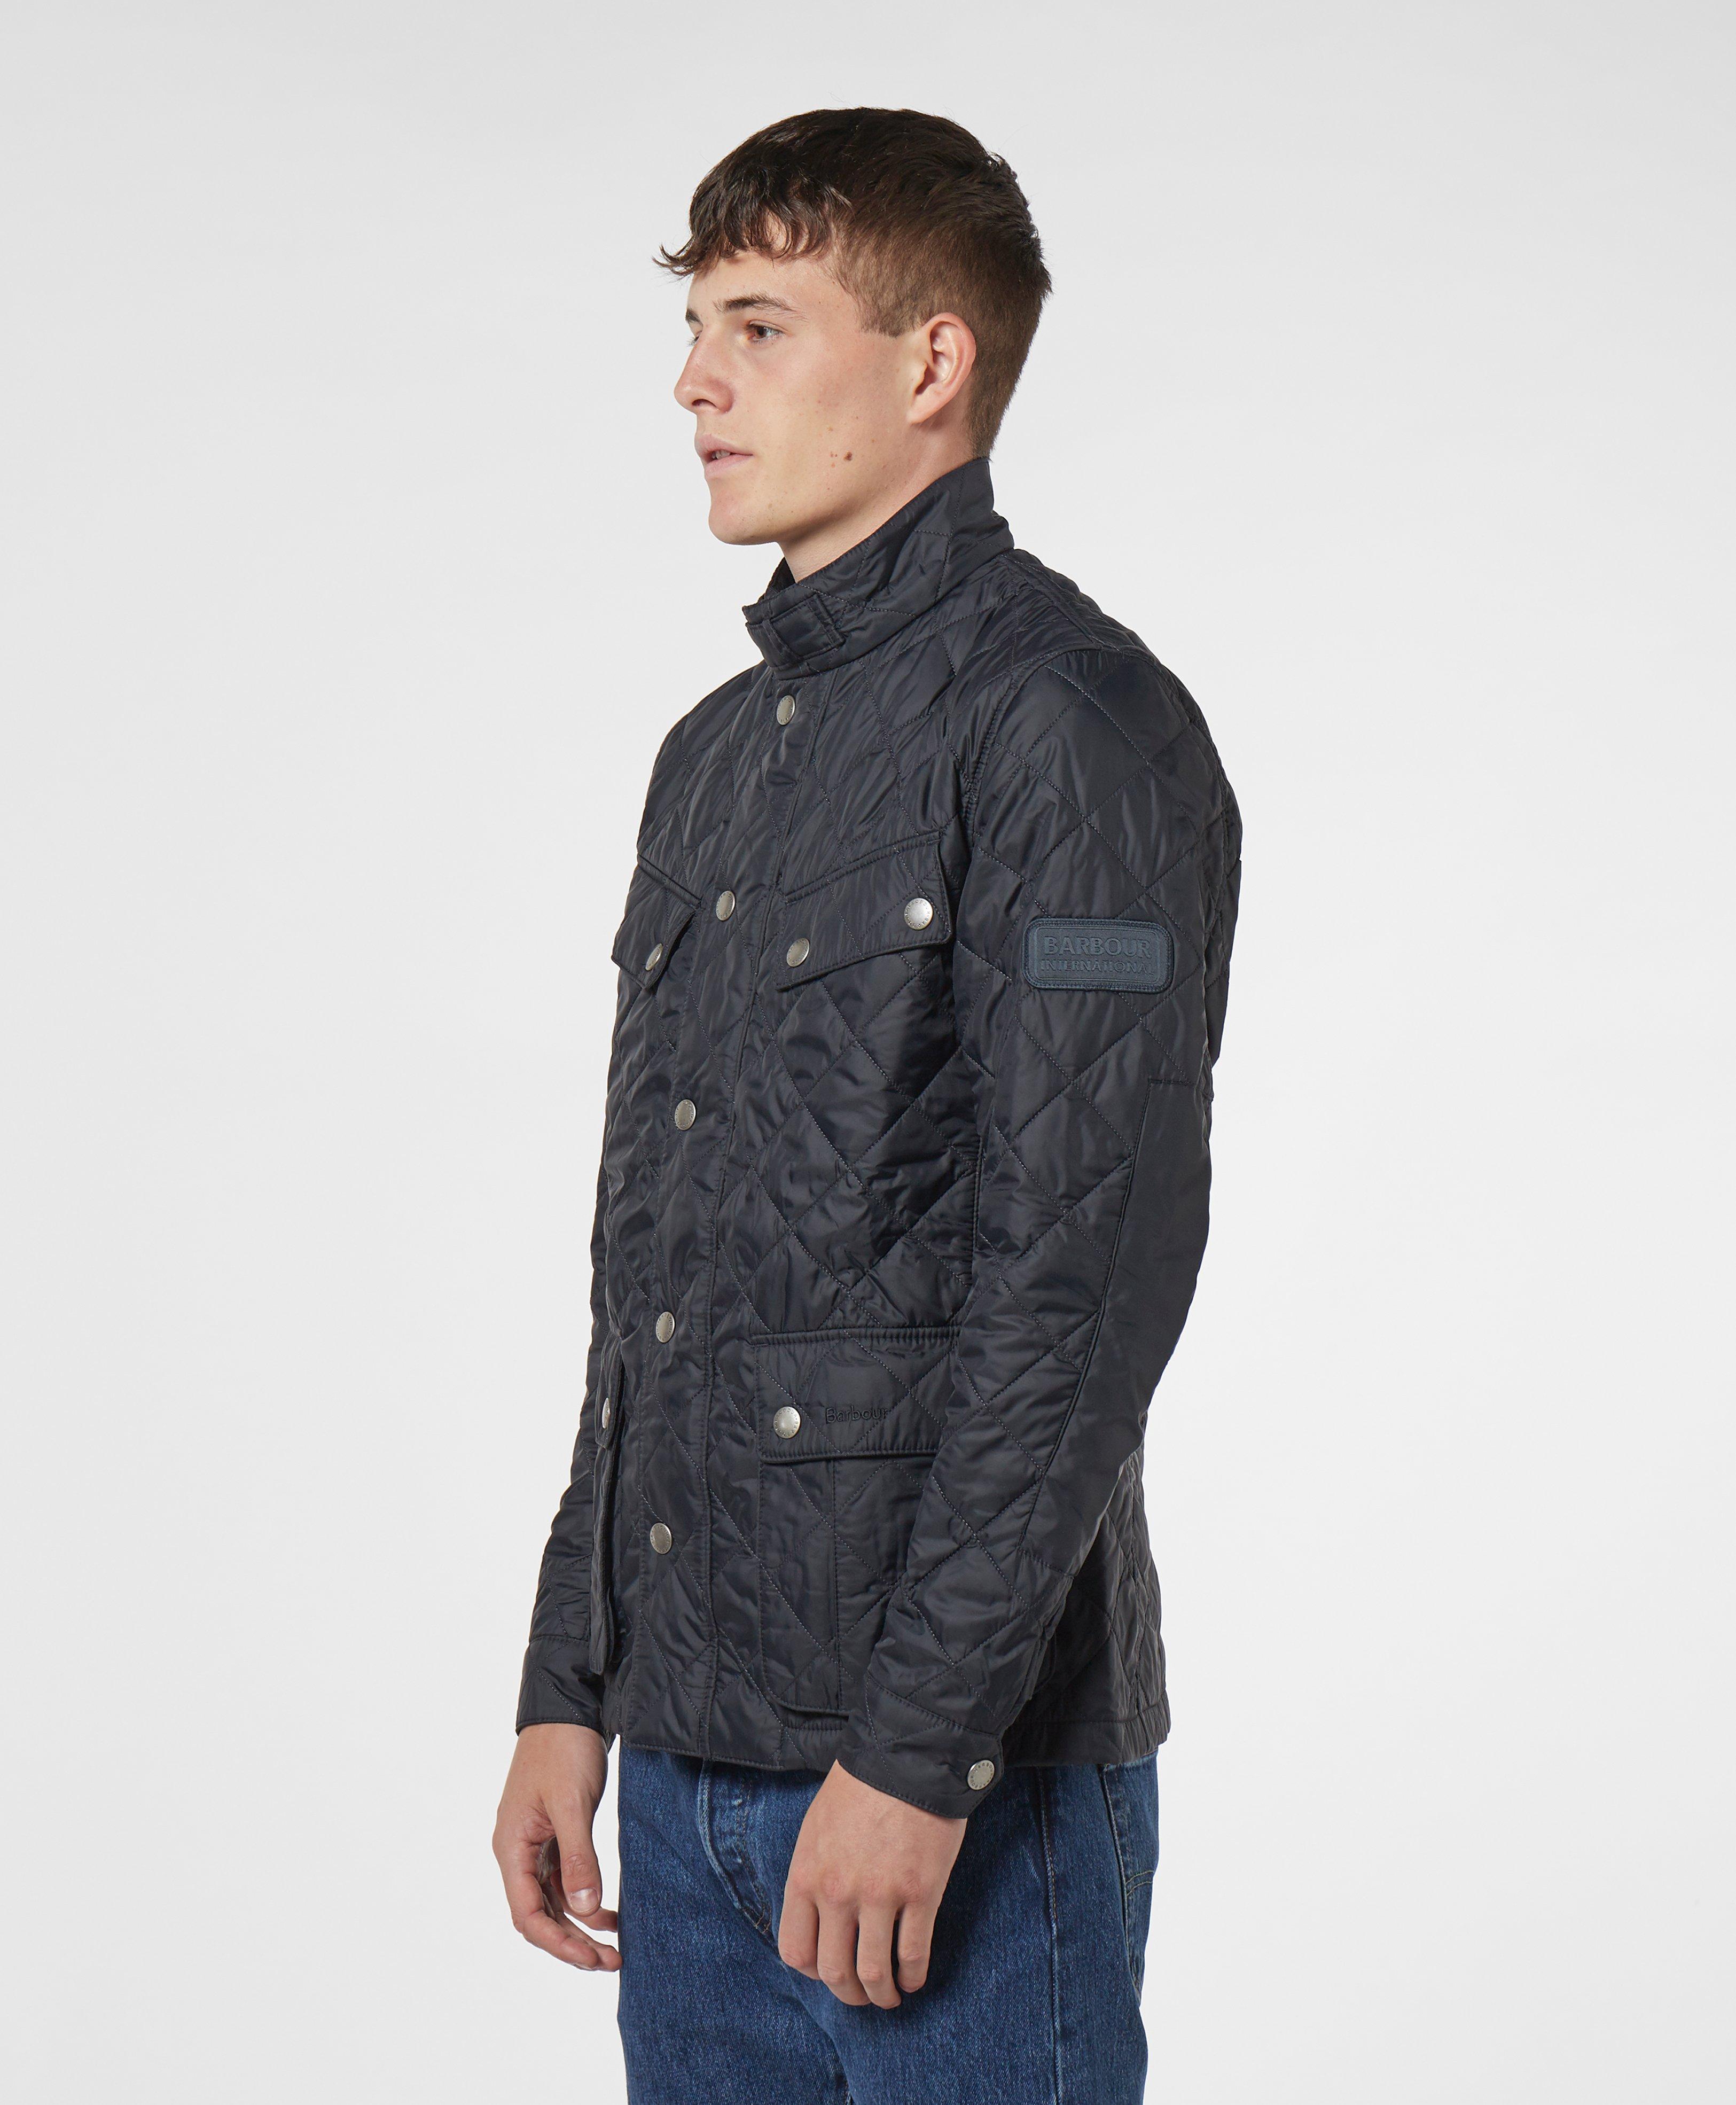 barbour ariel quilted jacket